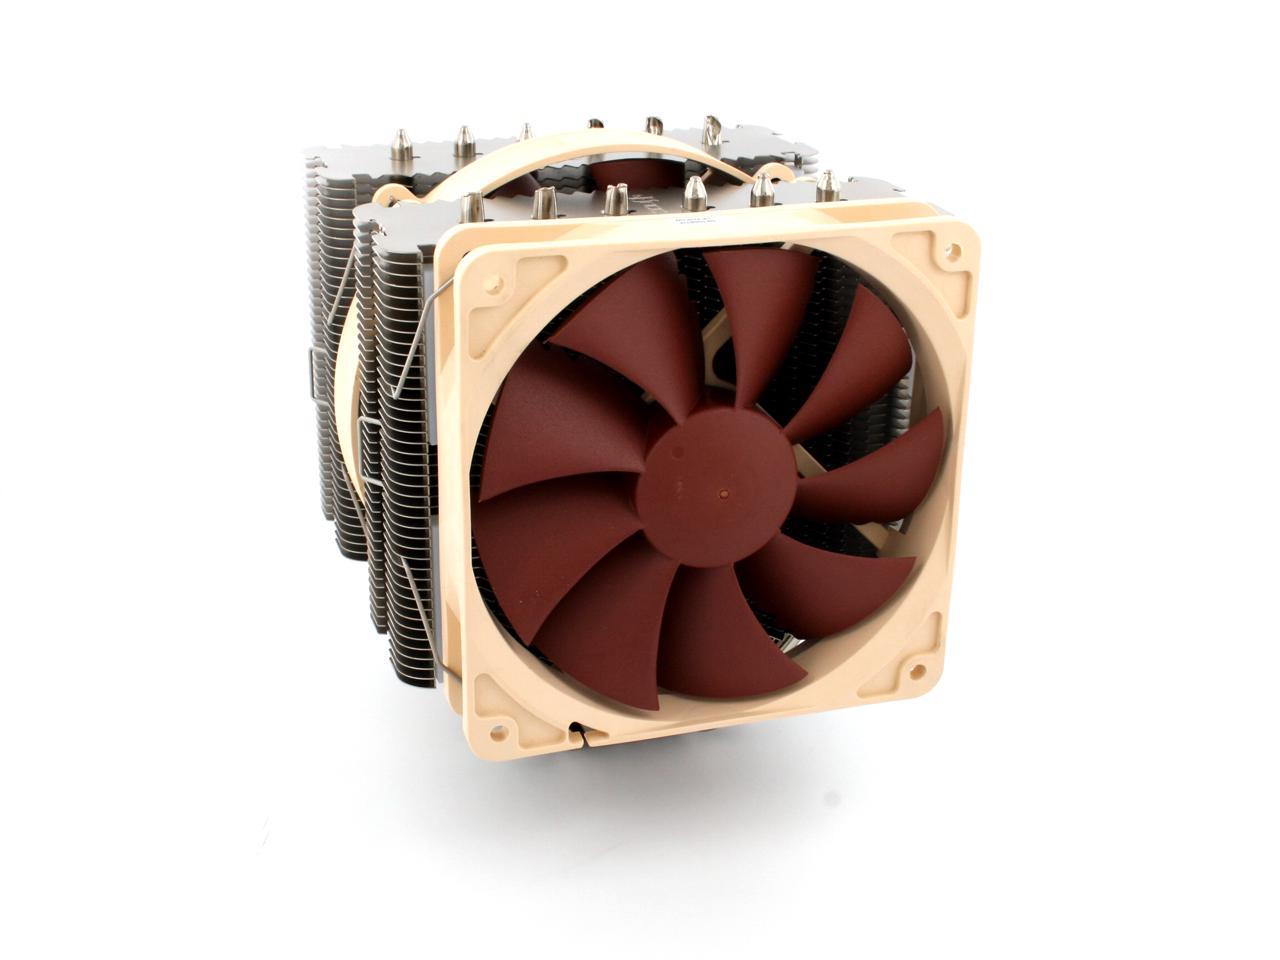 NH-D14, Premium CPU Cooler with Dual NF-P14 PWM and PWM Fans -